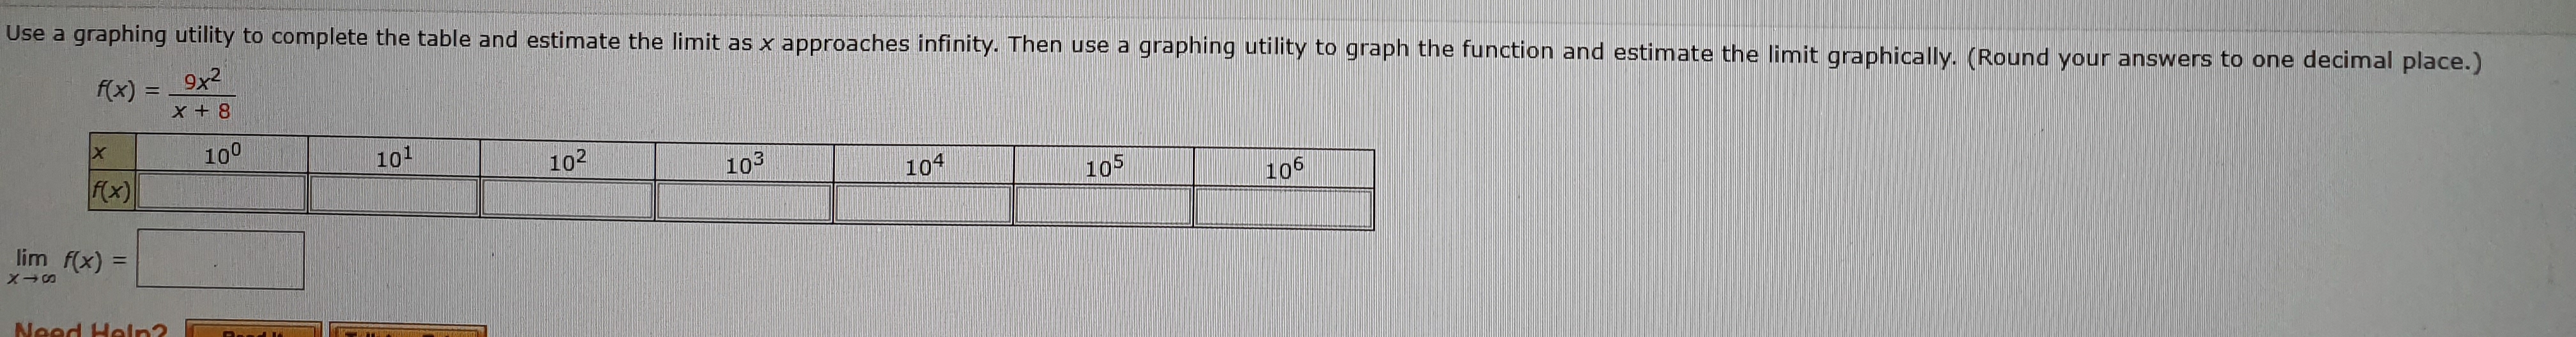 Use a graphing utility to complete the table and estimate the limit as x approaches infinity. Then use a
9x2
graphing utility to graph the function and estimate the limit graphically. (Round your answers to one decimal place.)
f(x)
8 +X
100
101
102
103
Fx)
104
105
106
lim f(x)
Noed Holrn2
